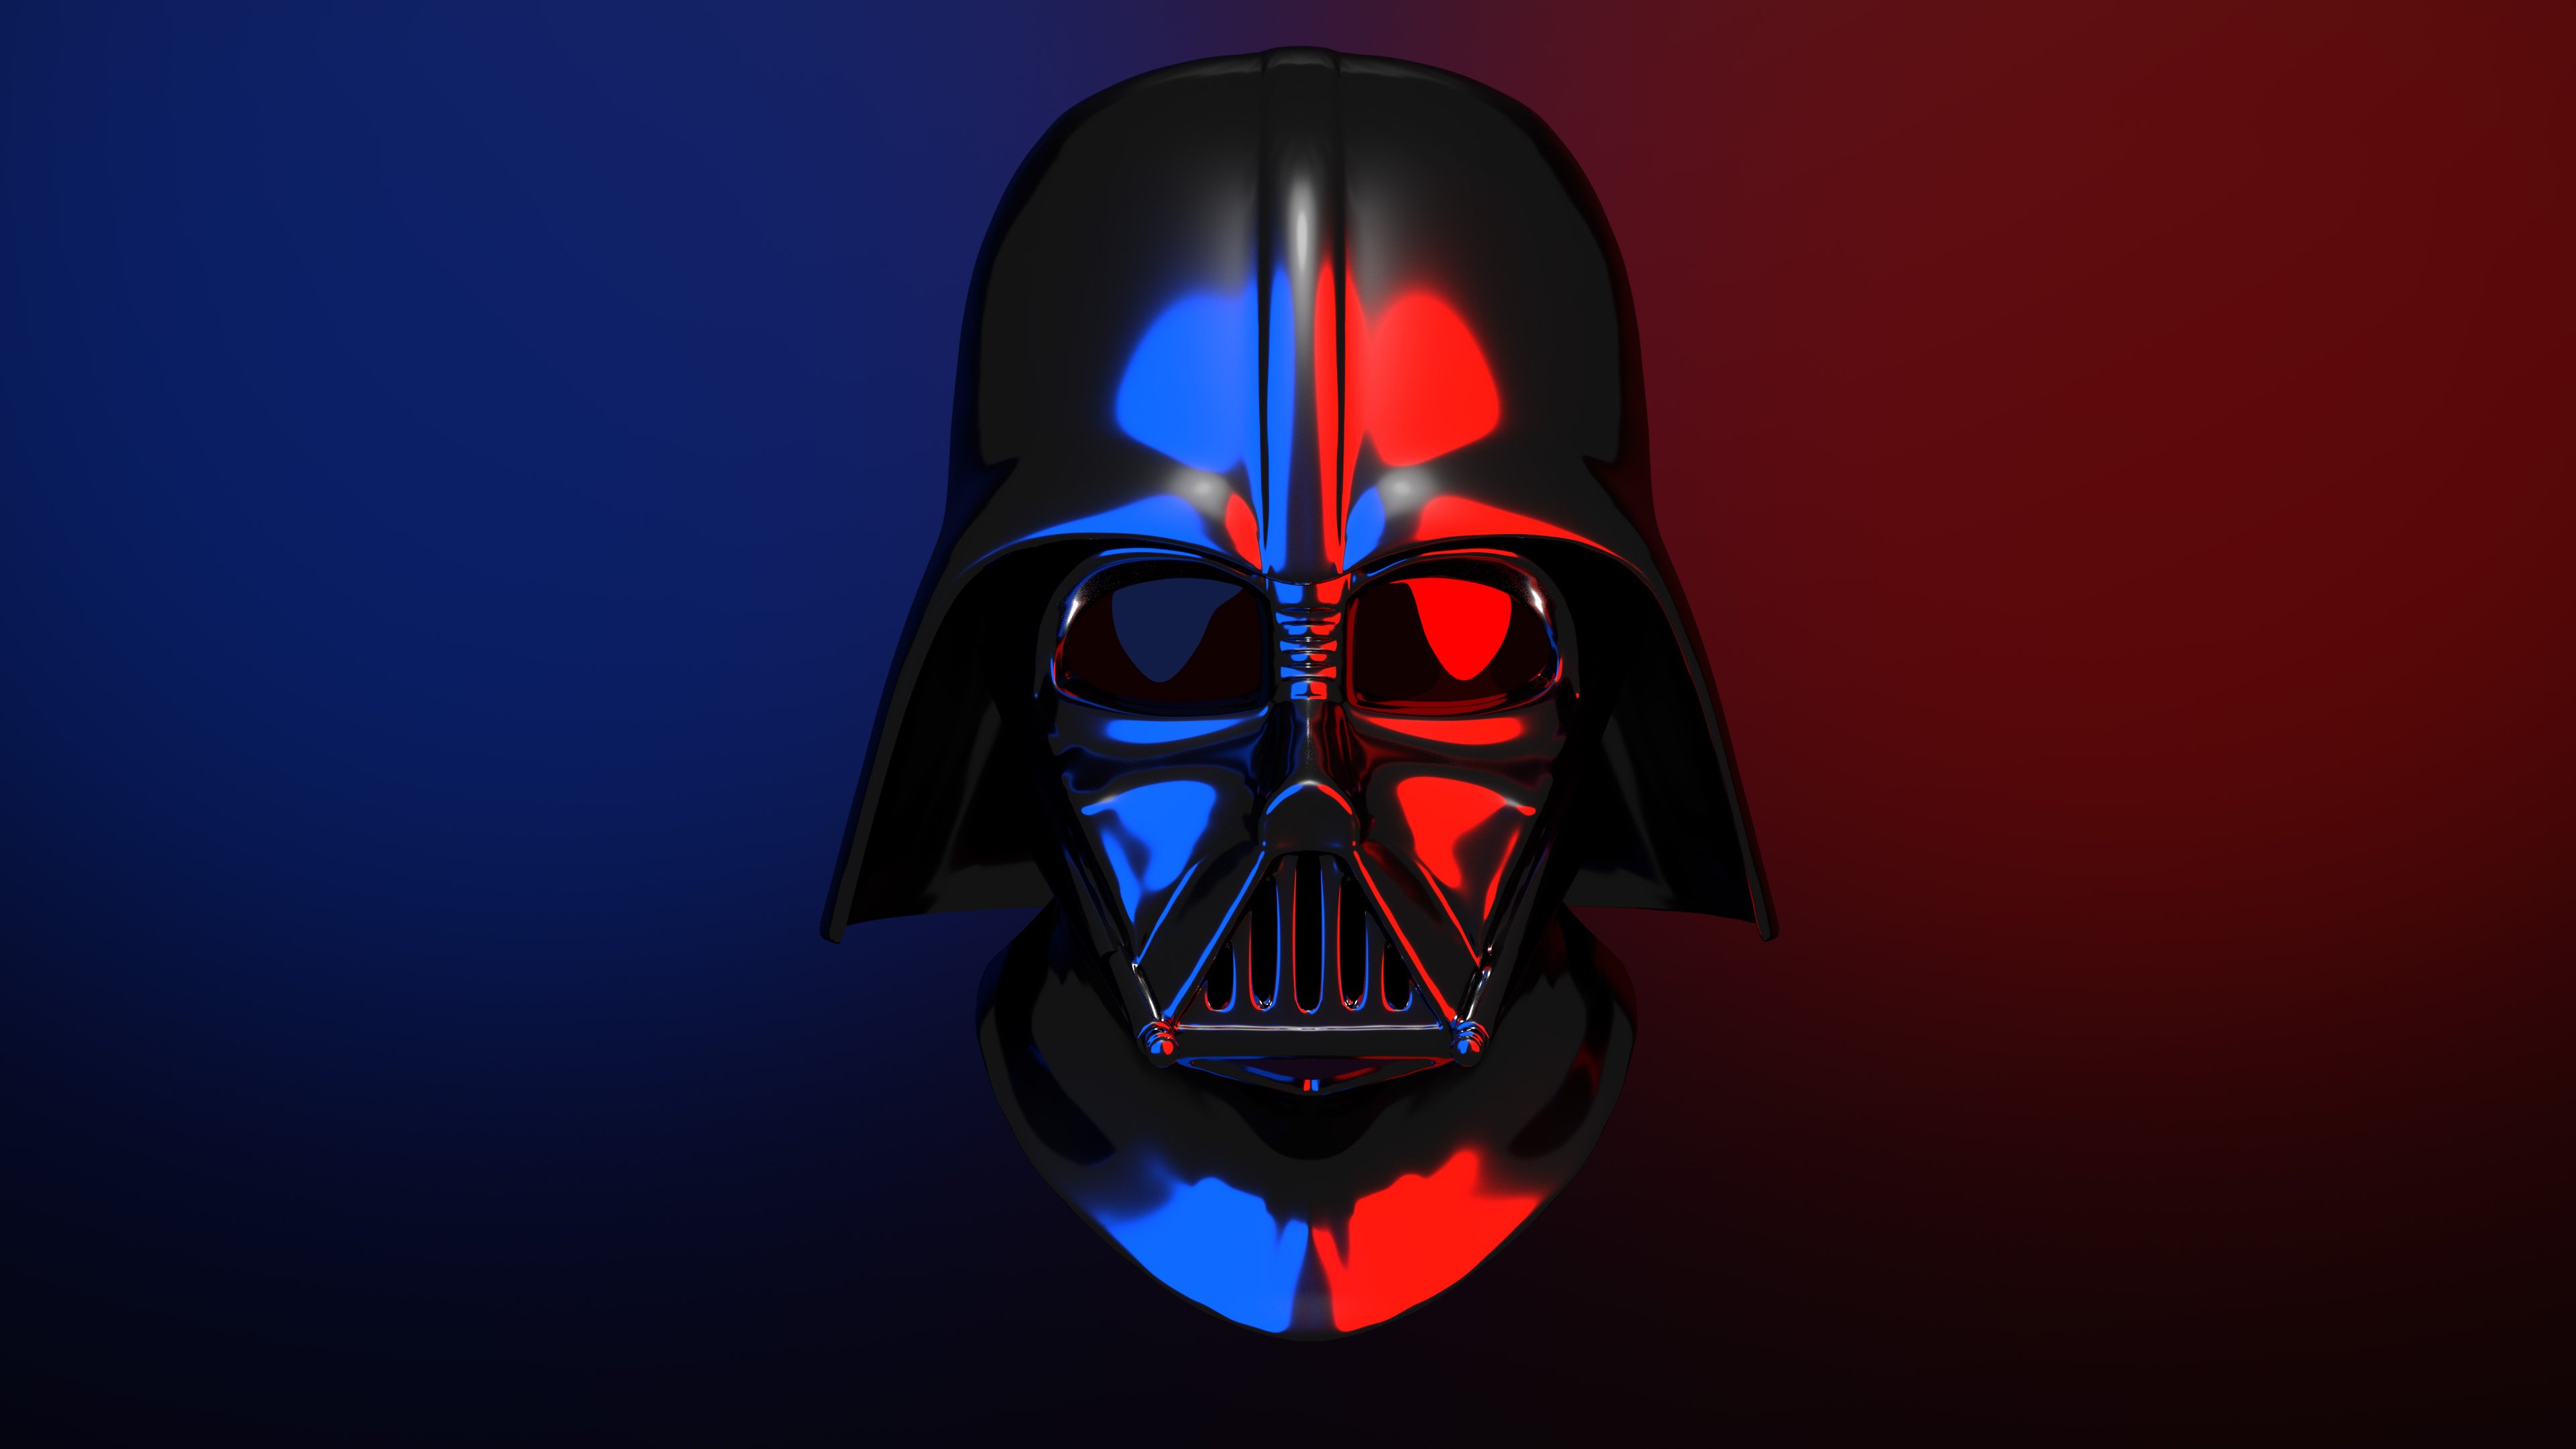 Vader 4k Wallpapers For Your Desktop Or Mobile Screen Free And Easy To Download